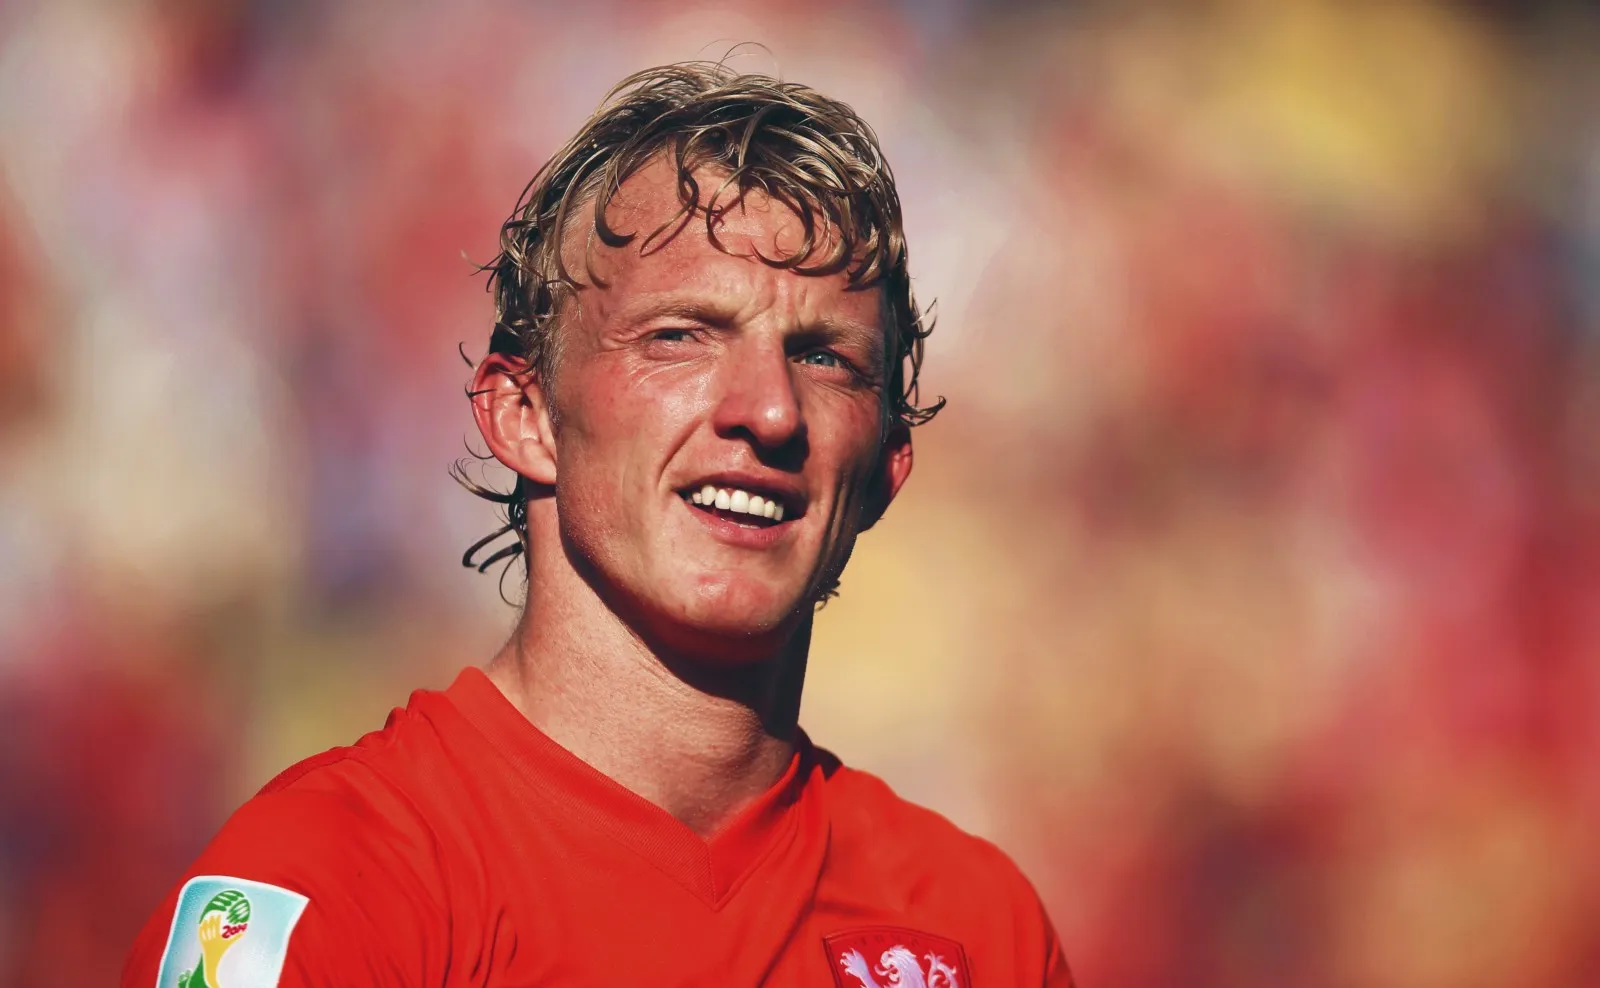 "Sometimes good things come very quickly" -- Dirk Kuyt